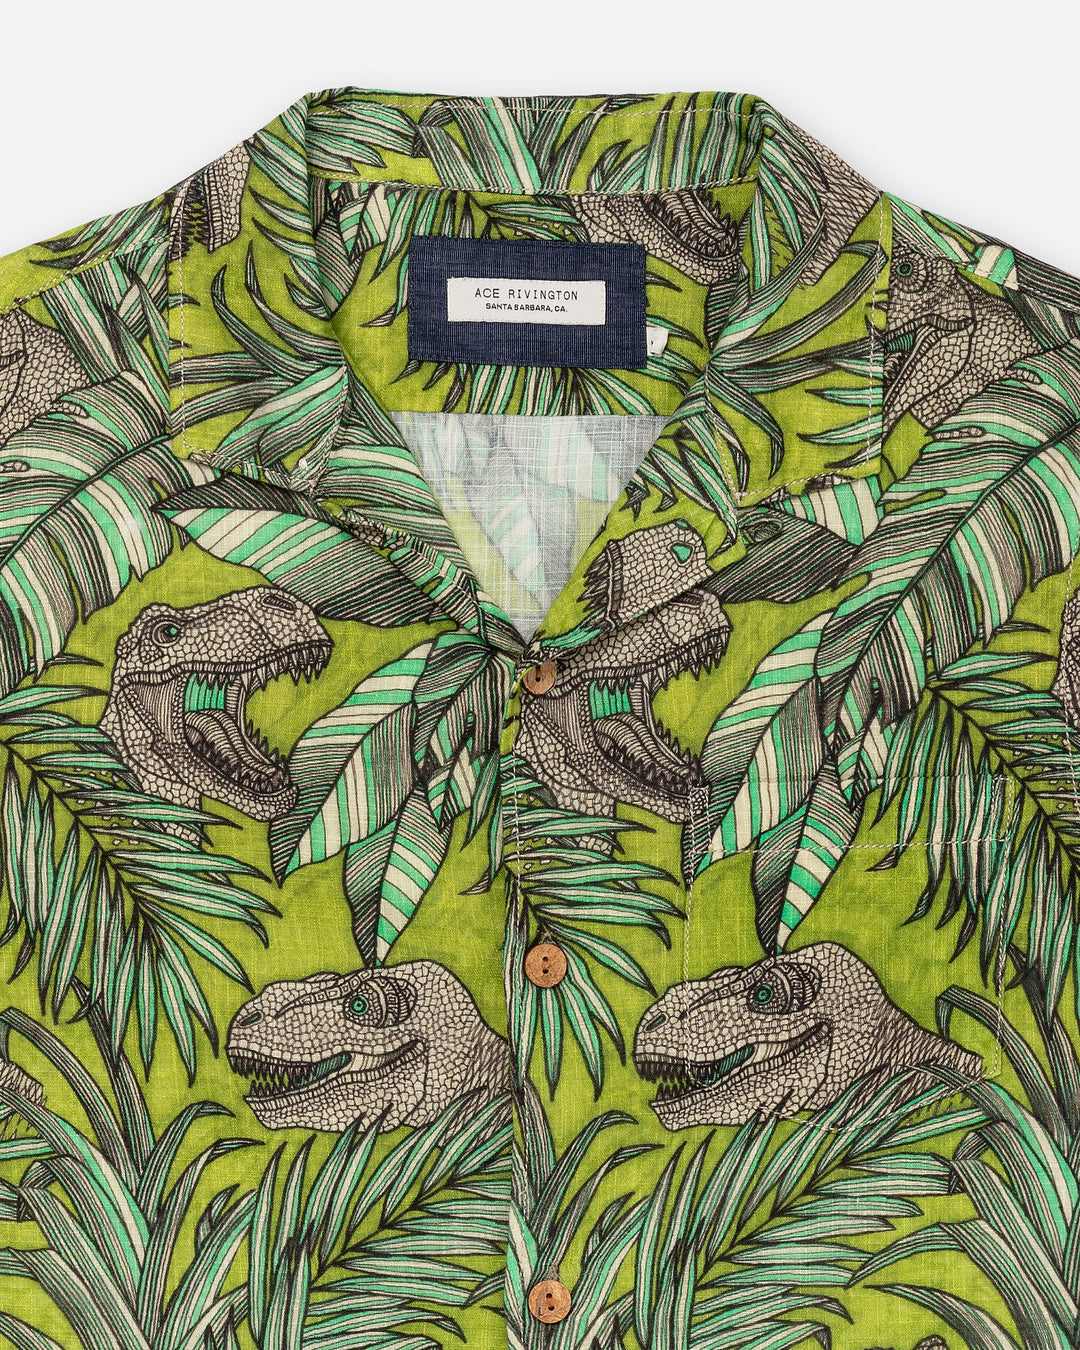 Zoomed-in detail shot of flat lay of front of Ace Rivington "Man Eater" green and brown floral-themed camp shirt with leaf and dinosaur design with left breast-pocket and emphasized inner layer of doubles-gauze textured fabric and brown wooden buttons